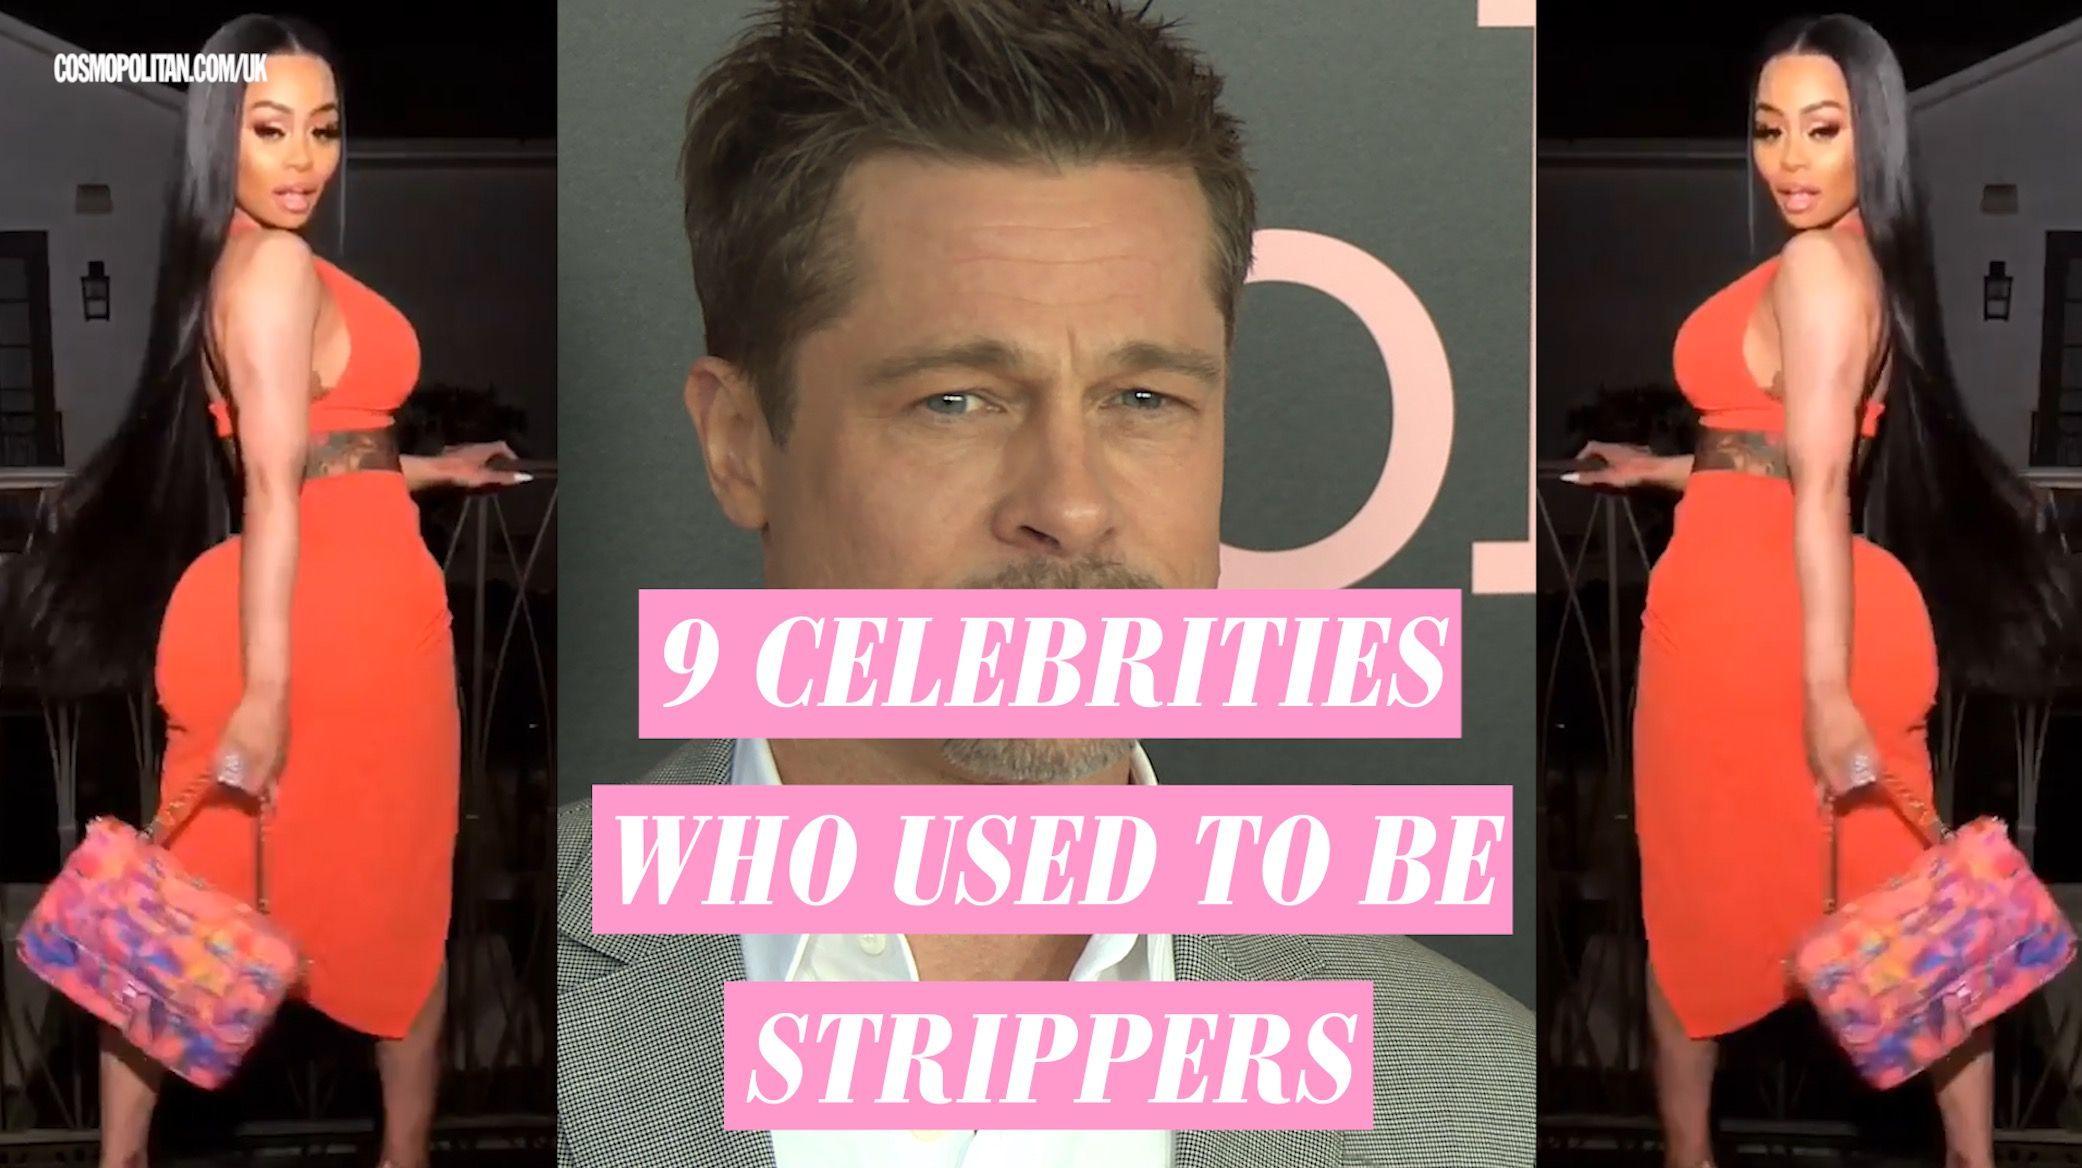 9 Celebrities who used to be strippers